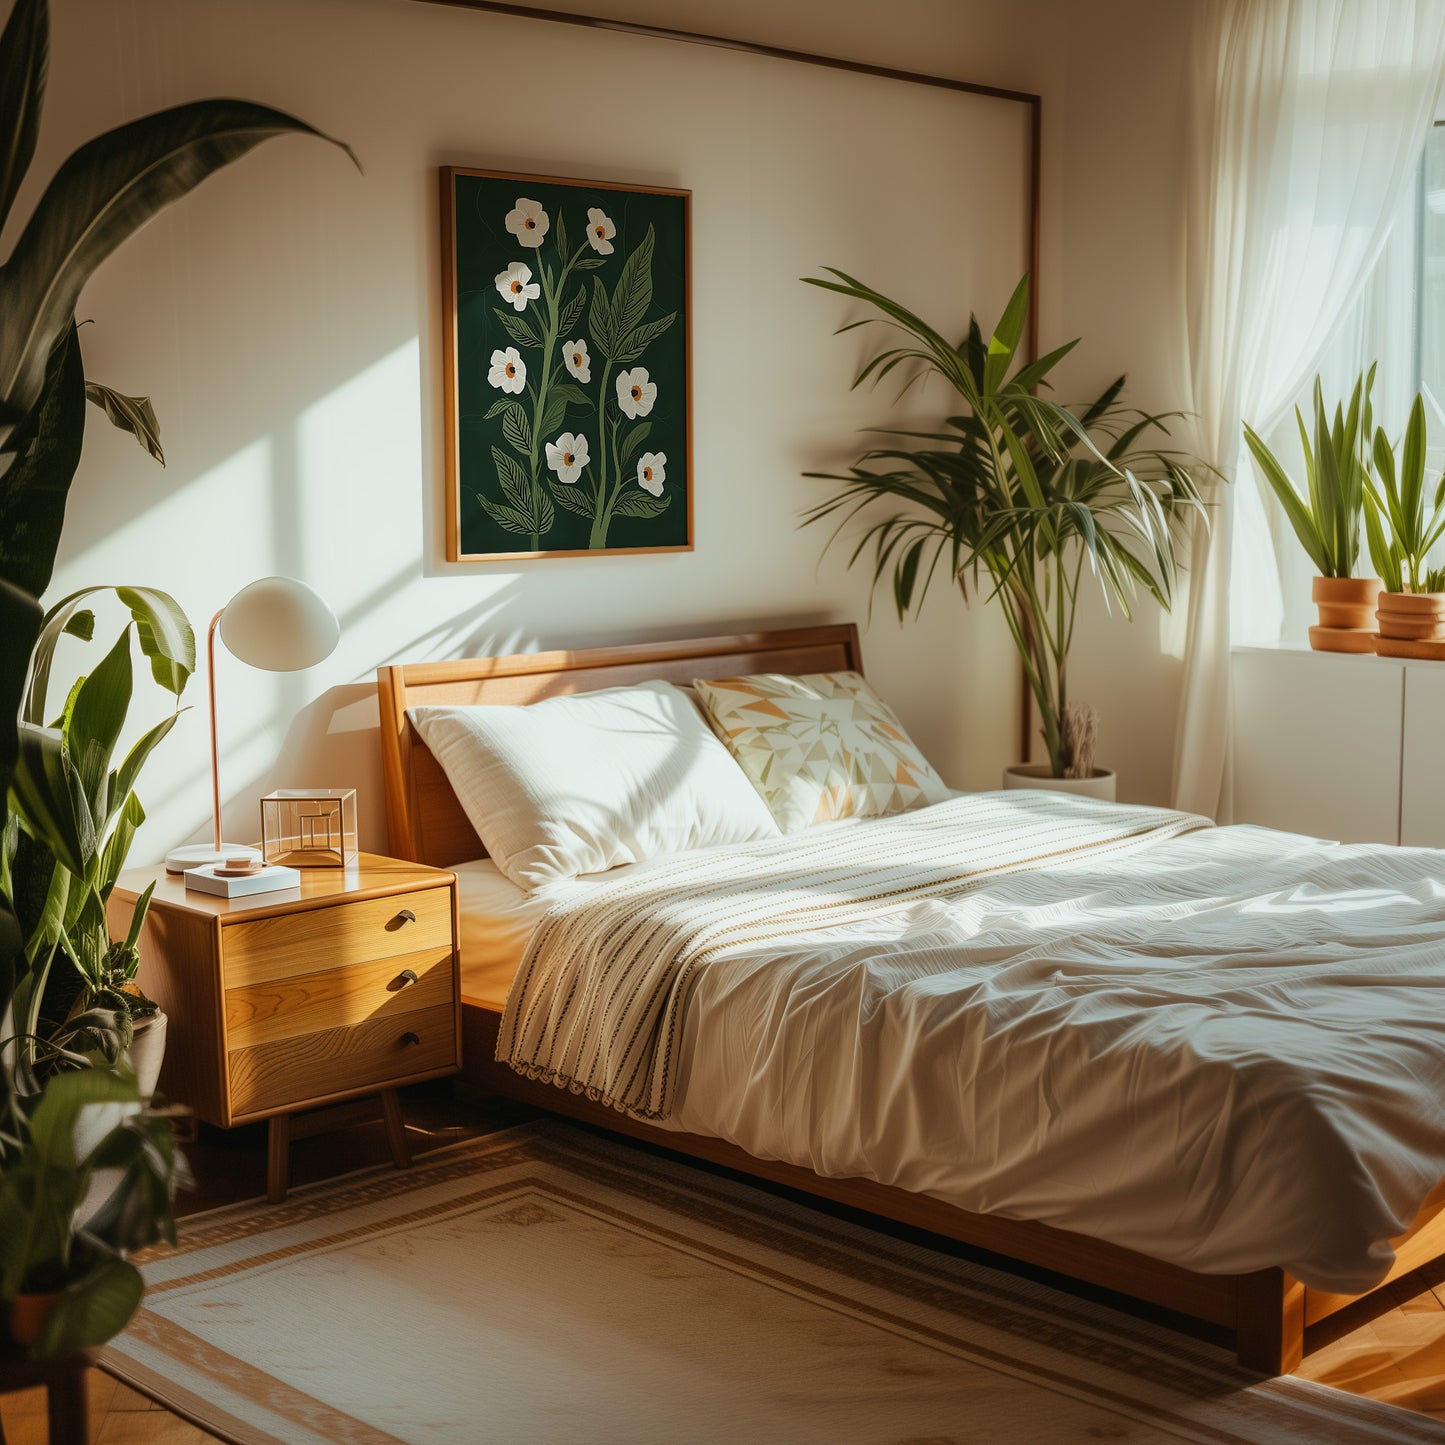 Cozy bedroom with sunlight, wooden bed, white bedding, plants, and wall art.